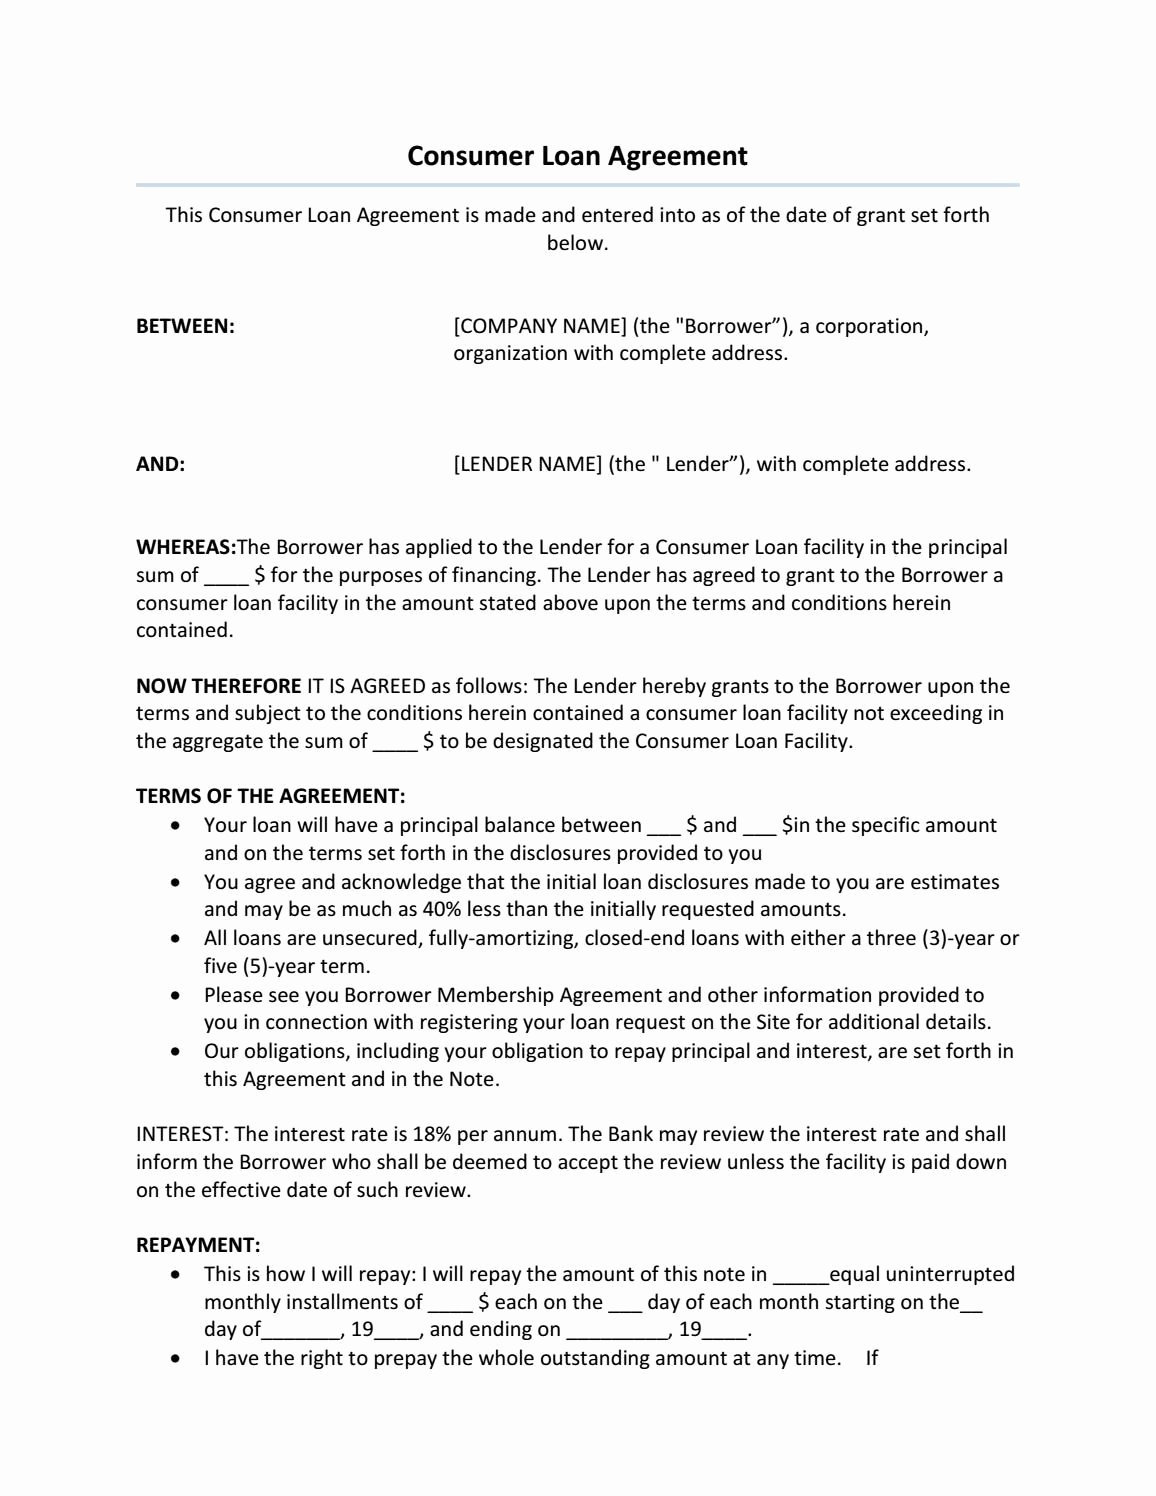 Private Mortgage Payoff Letter Template Unique Consumer Loan Agreement Sample